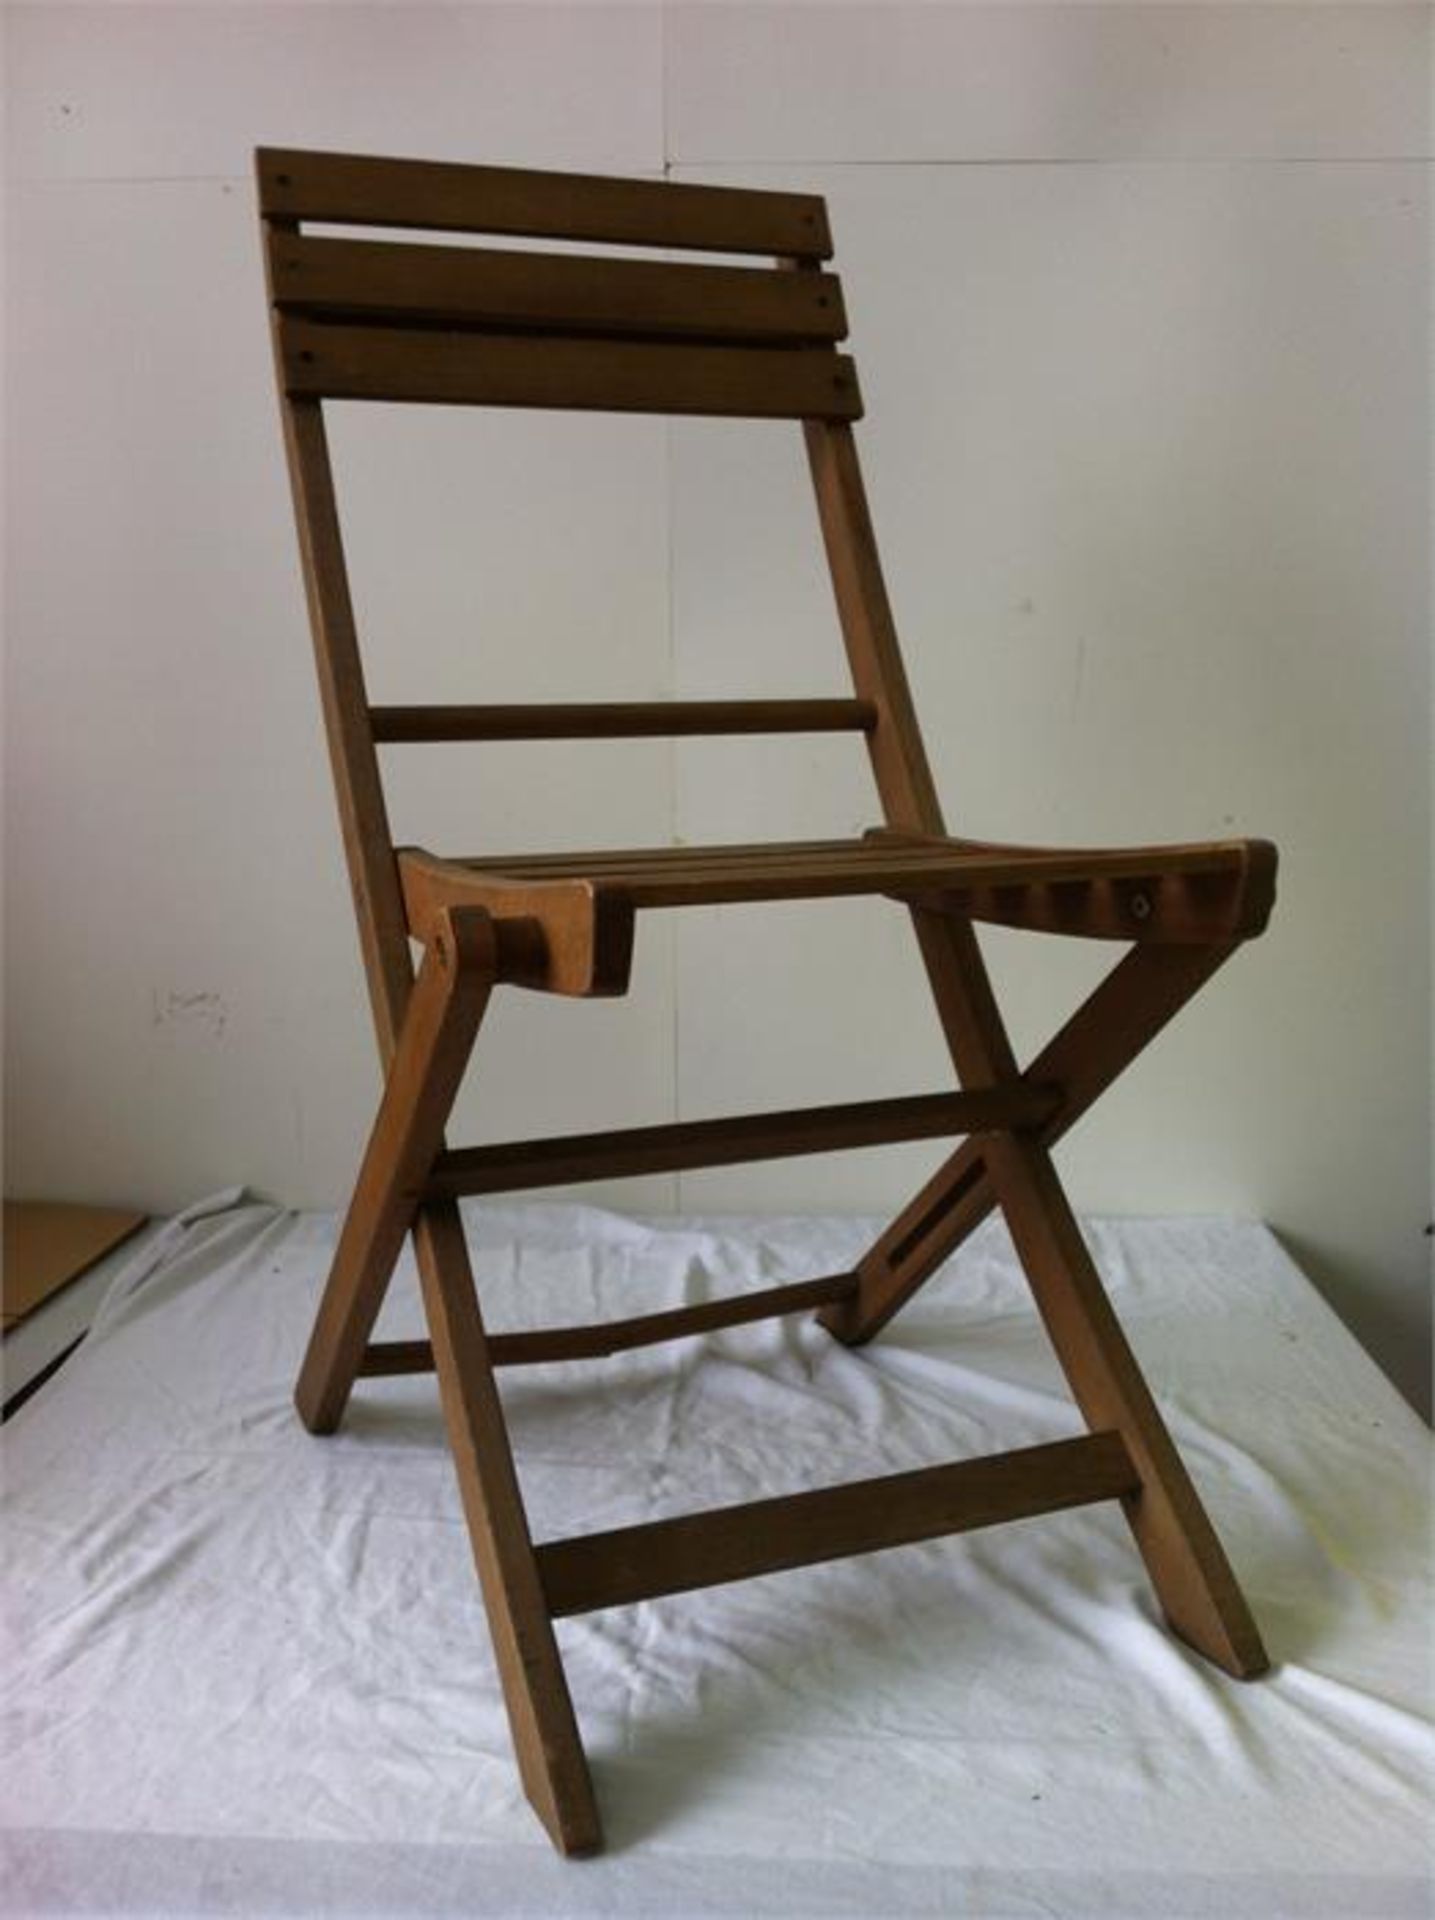 3 x Wooden foldaway chairs